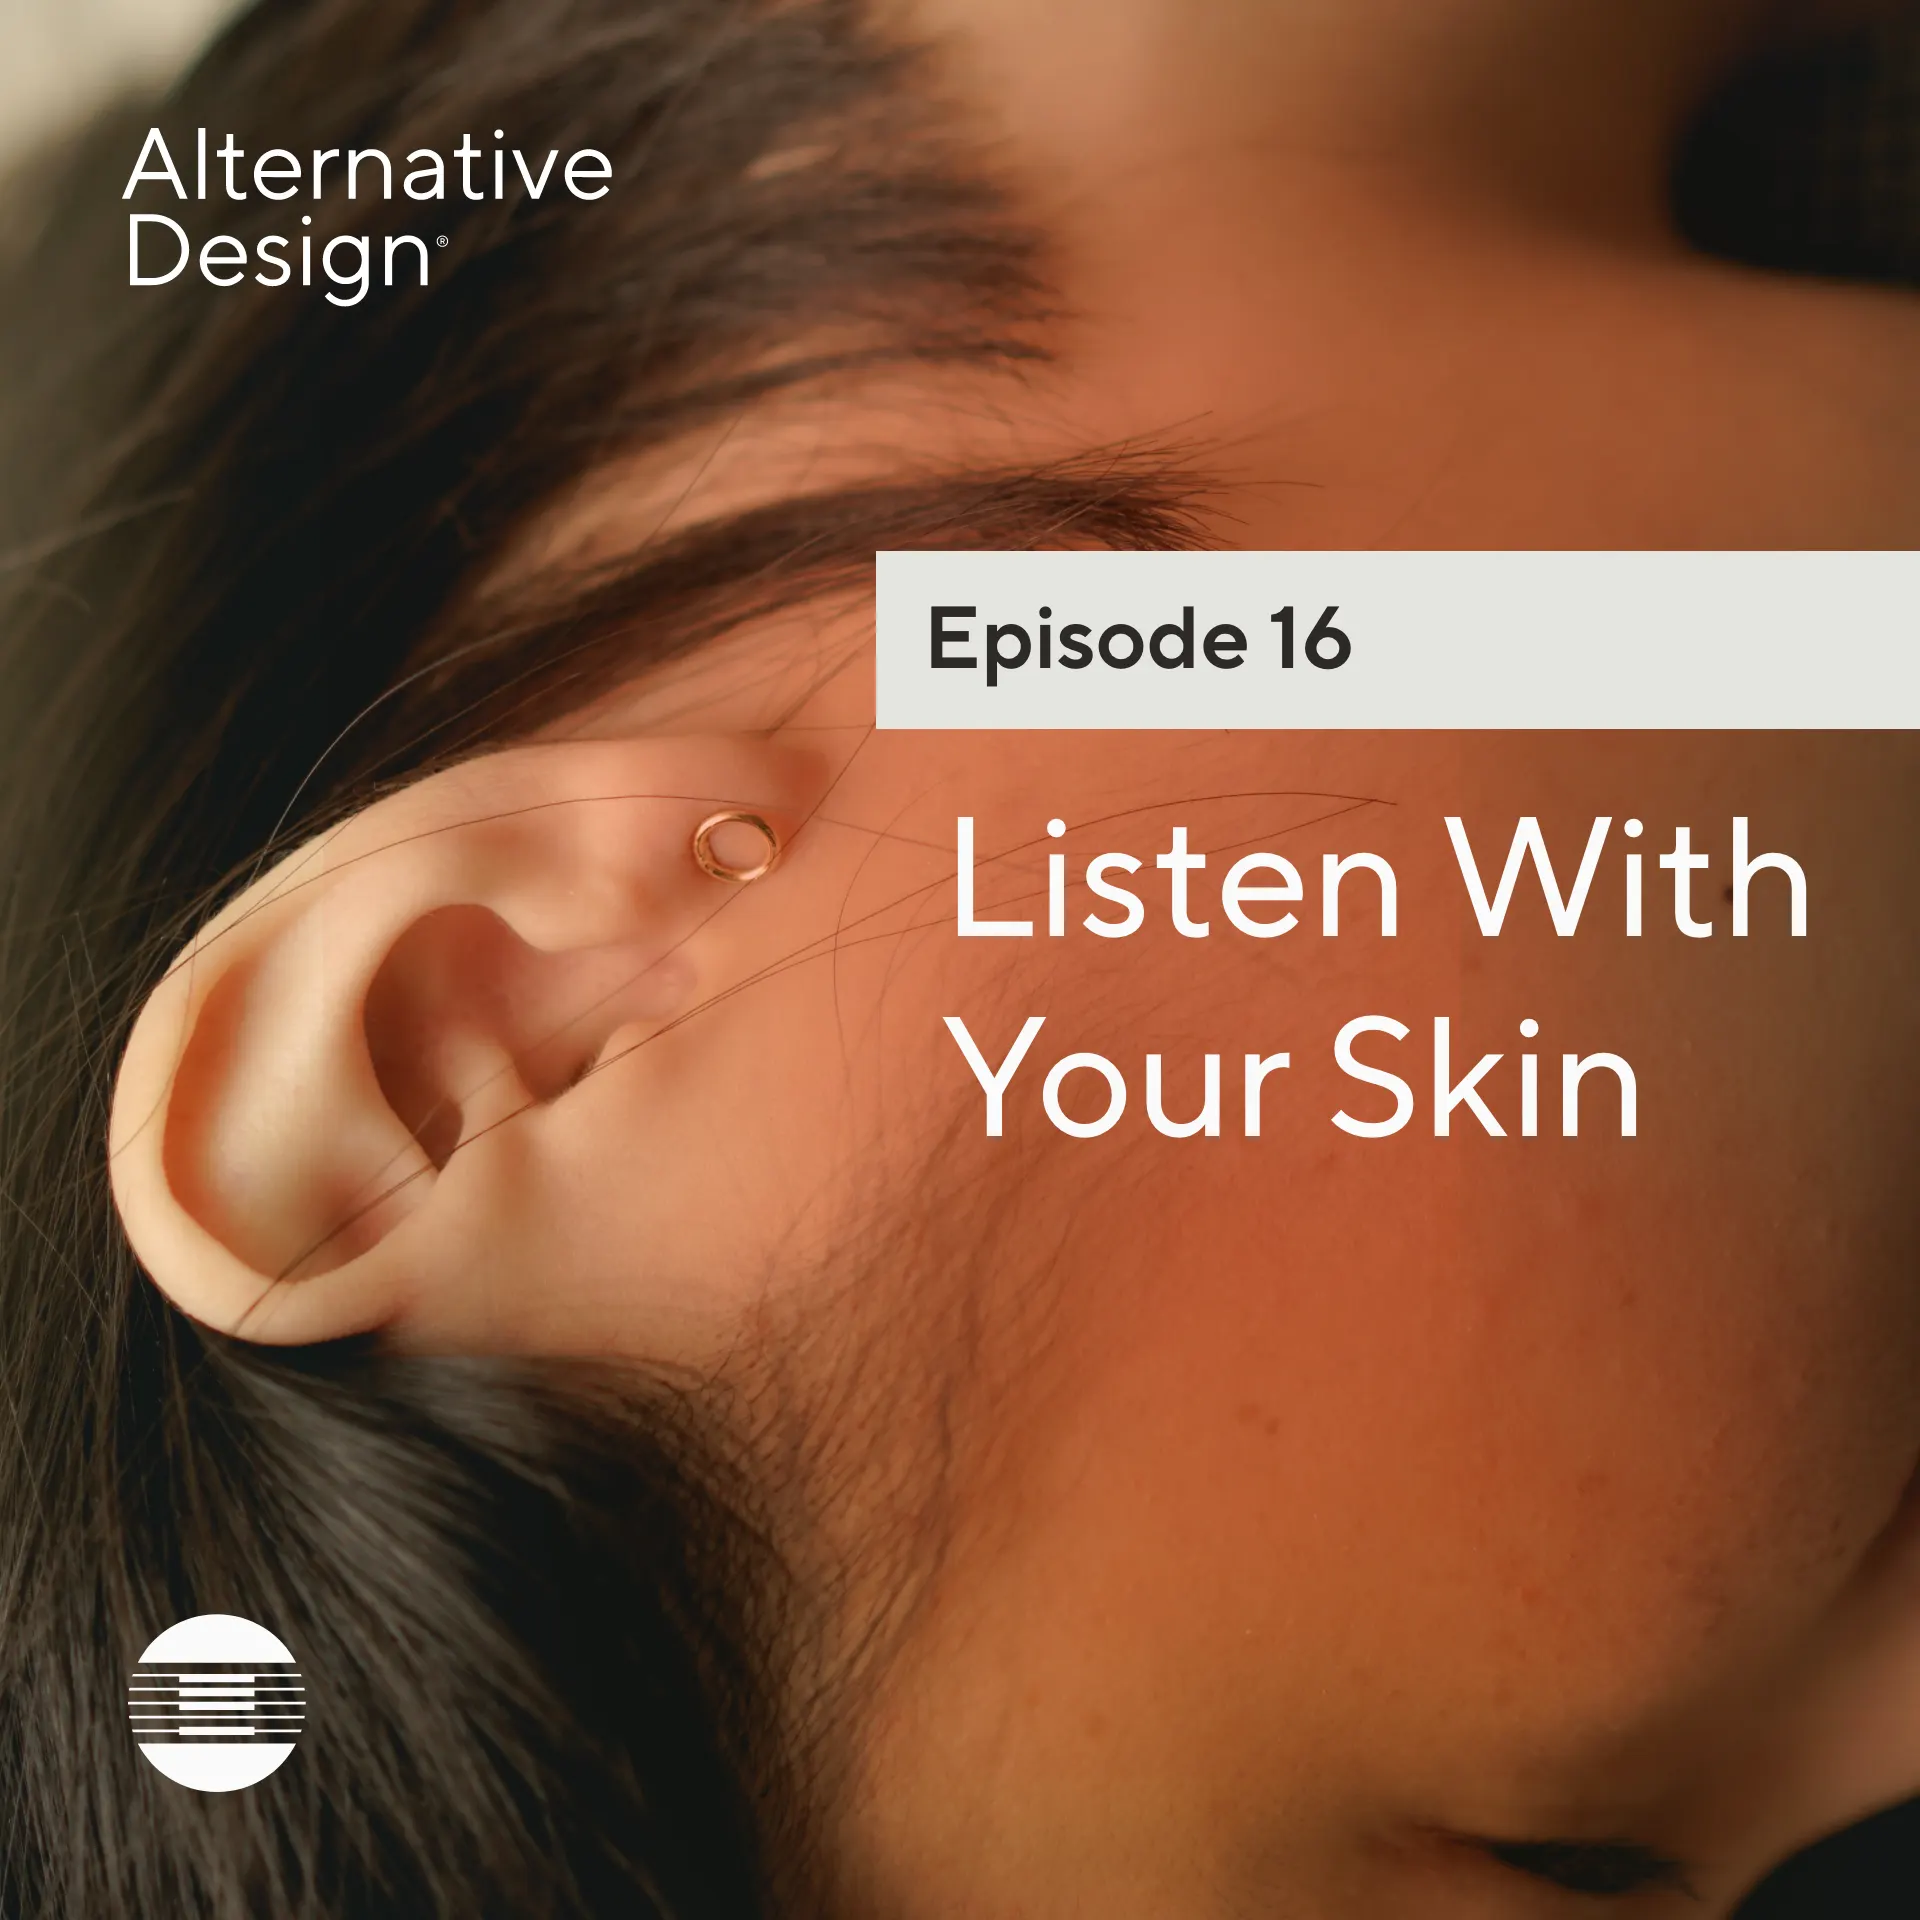 Episode 16 - Listen With Your Skin